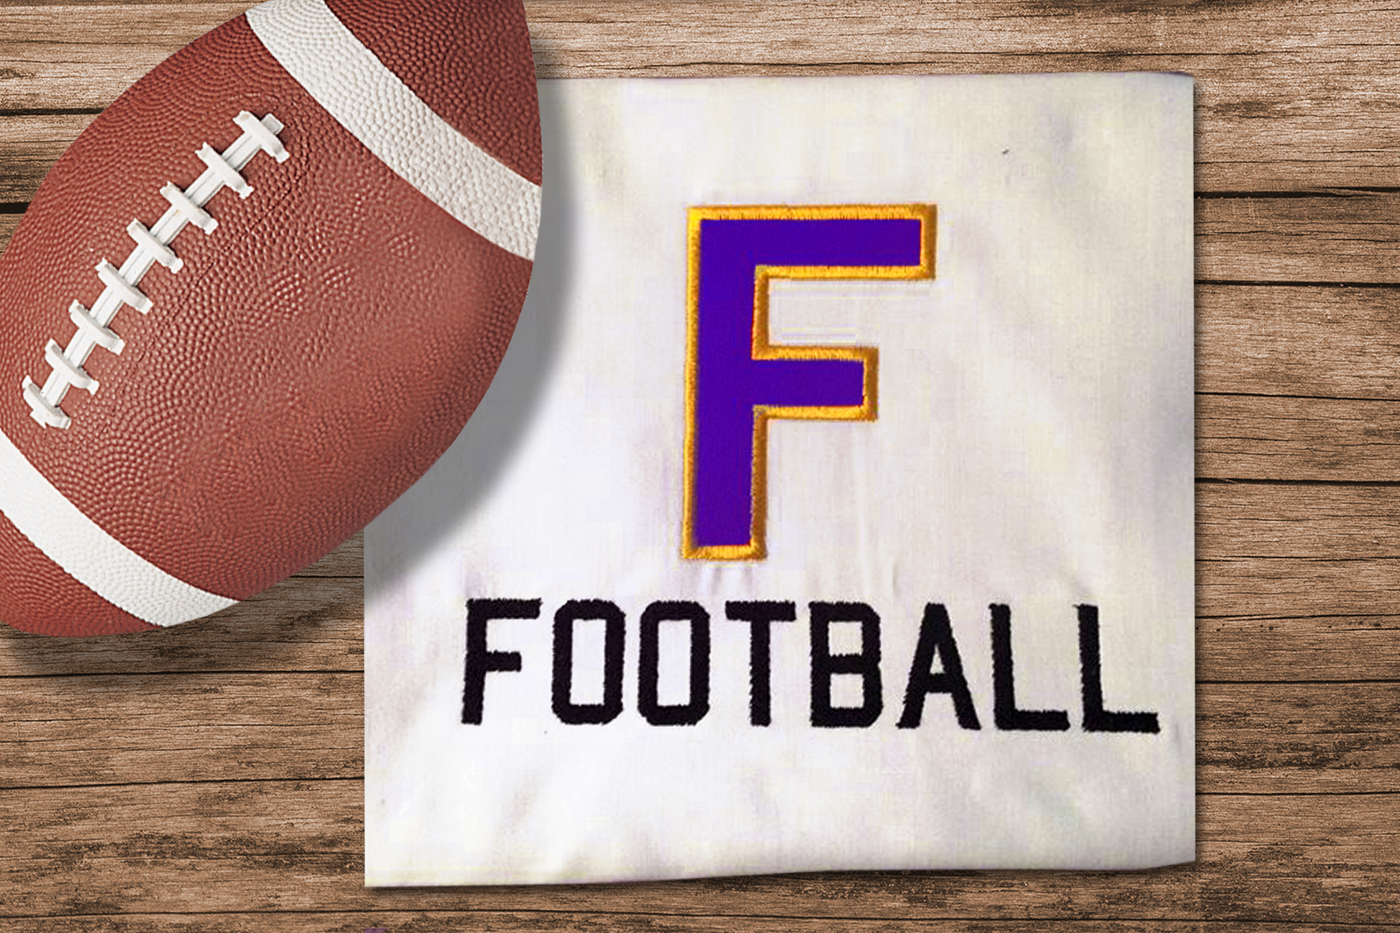 A folded white tee with a football laying on top. Embroidered onto the shirt is the word "FOOTBALL" with a large applique letter F above.